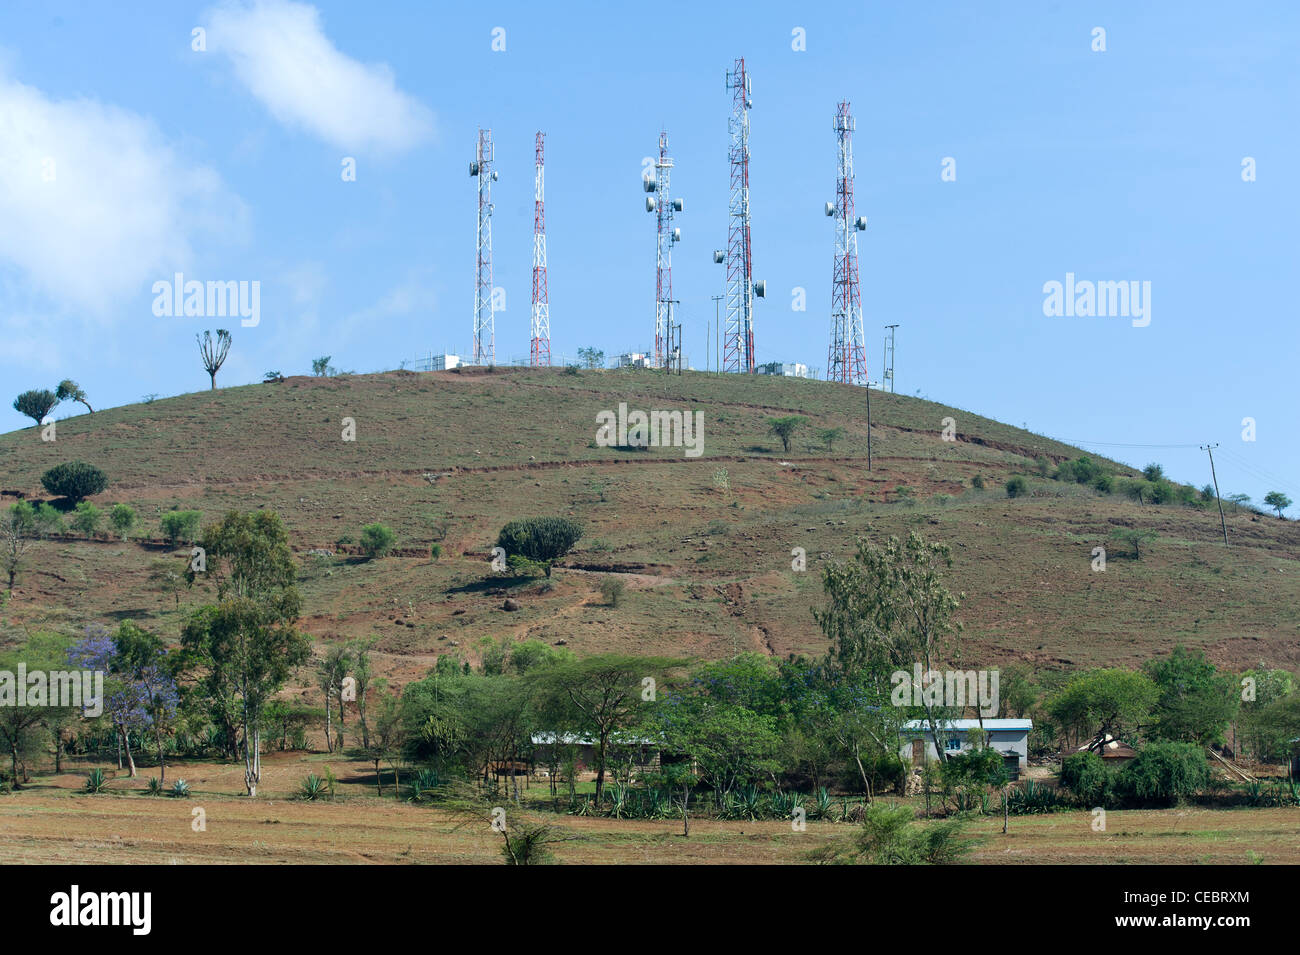 Telecommunication towers and small holder farm in a rural area, Arusha, Tanzania Stock Photo